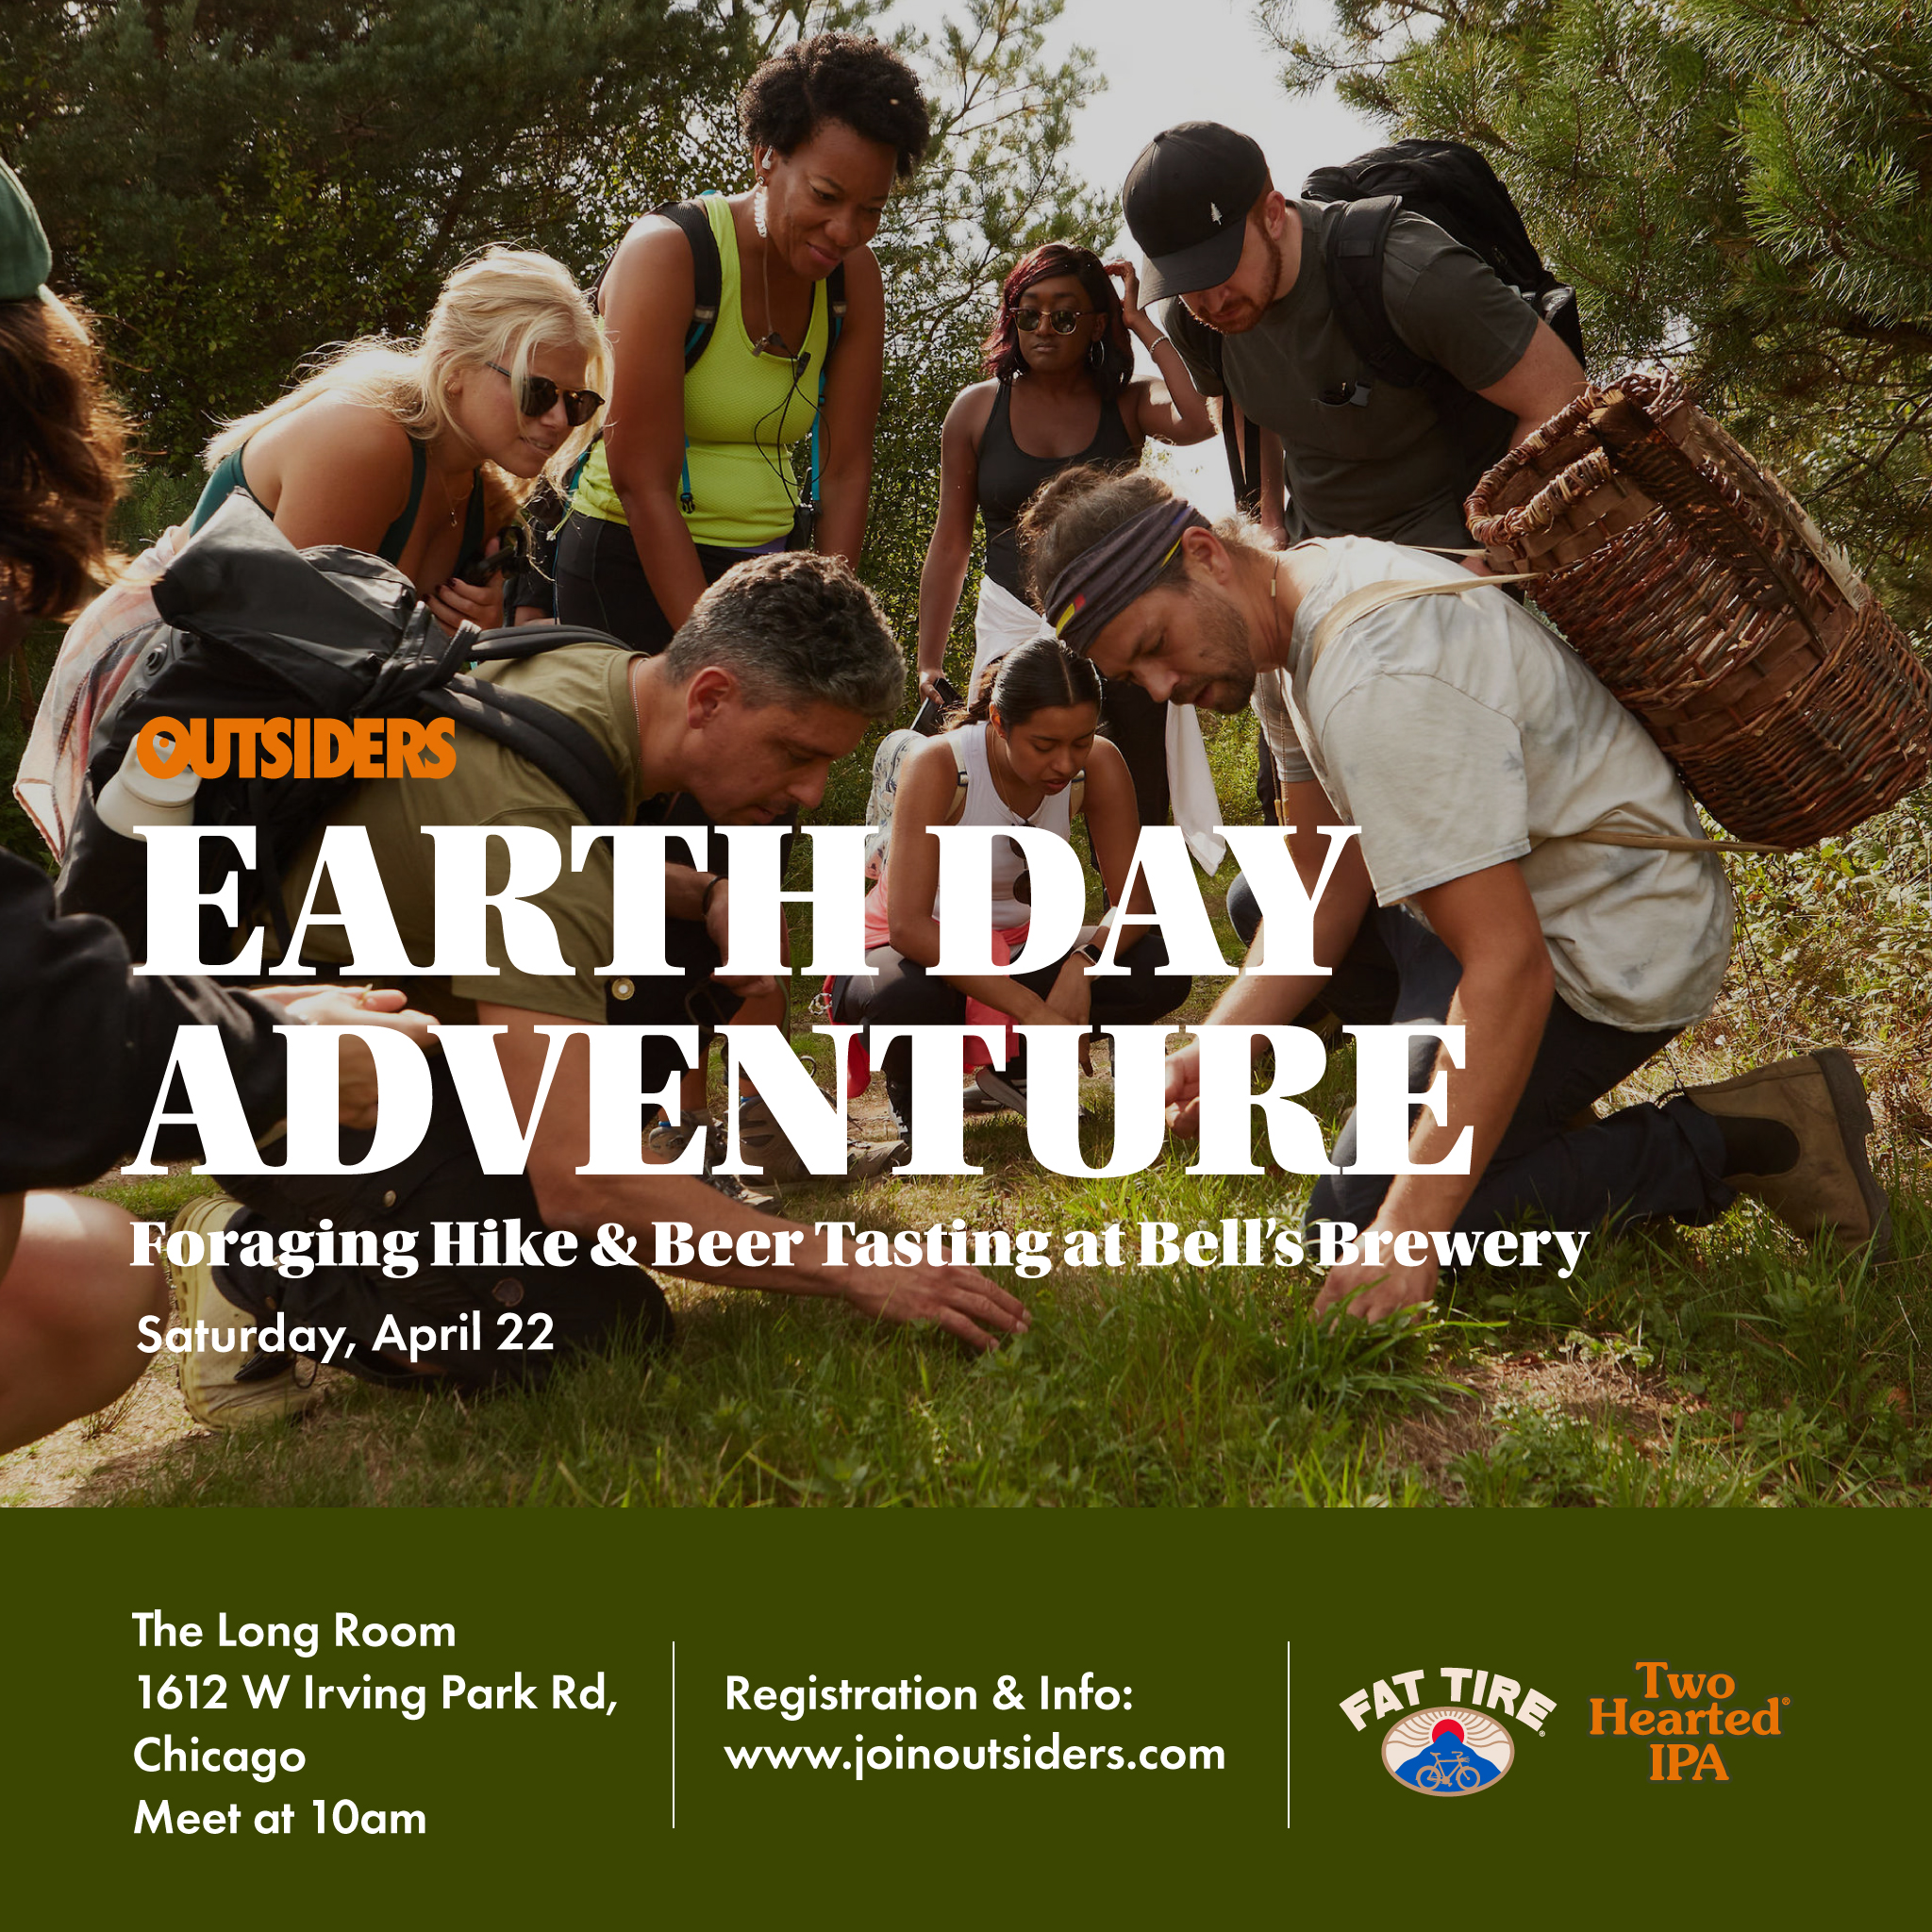 Earth Day Adventure - Foraging Hike & Beer Tasting at Bell's Brewery